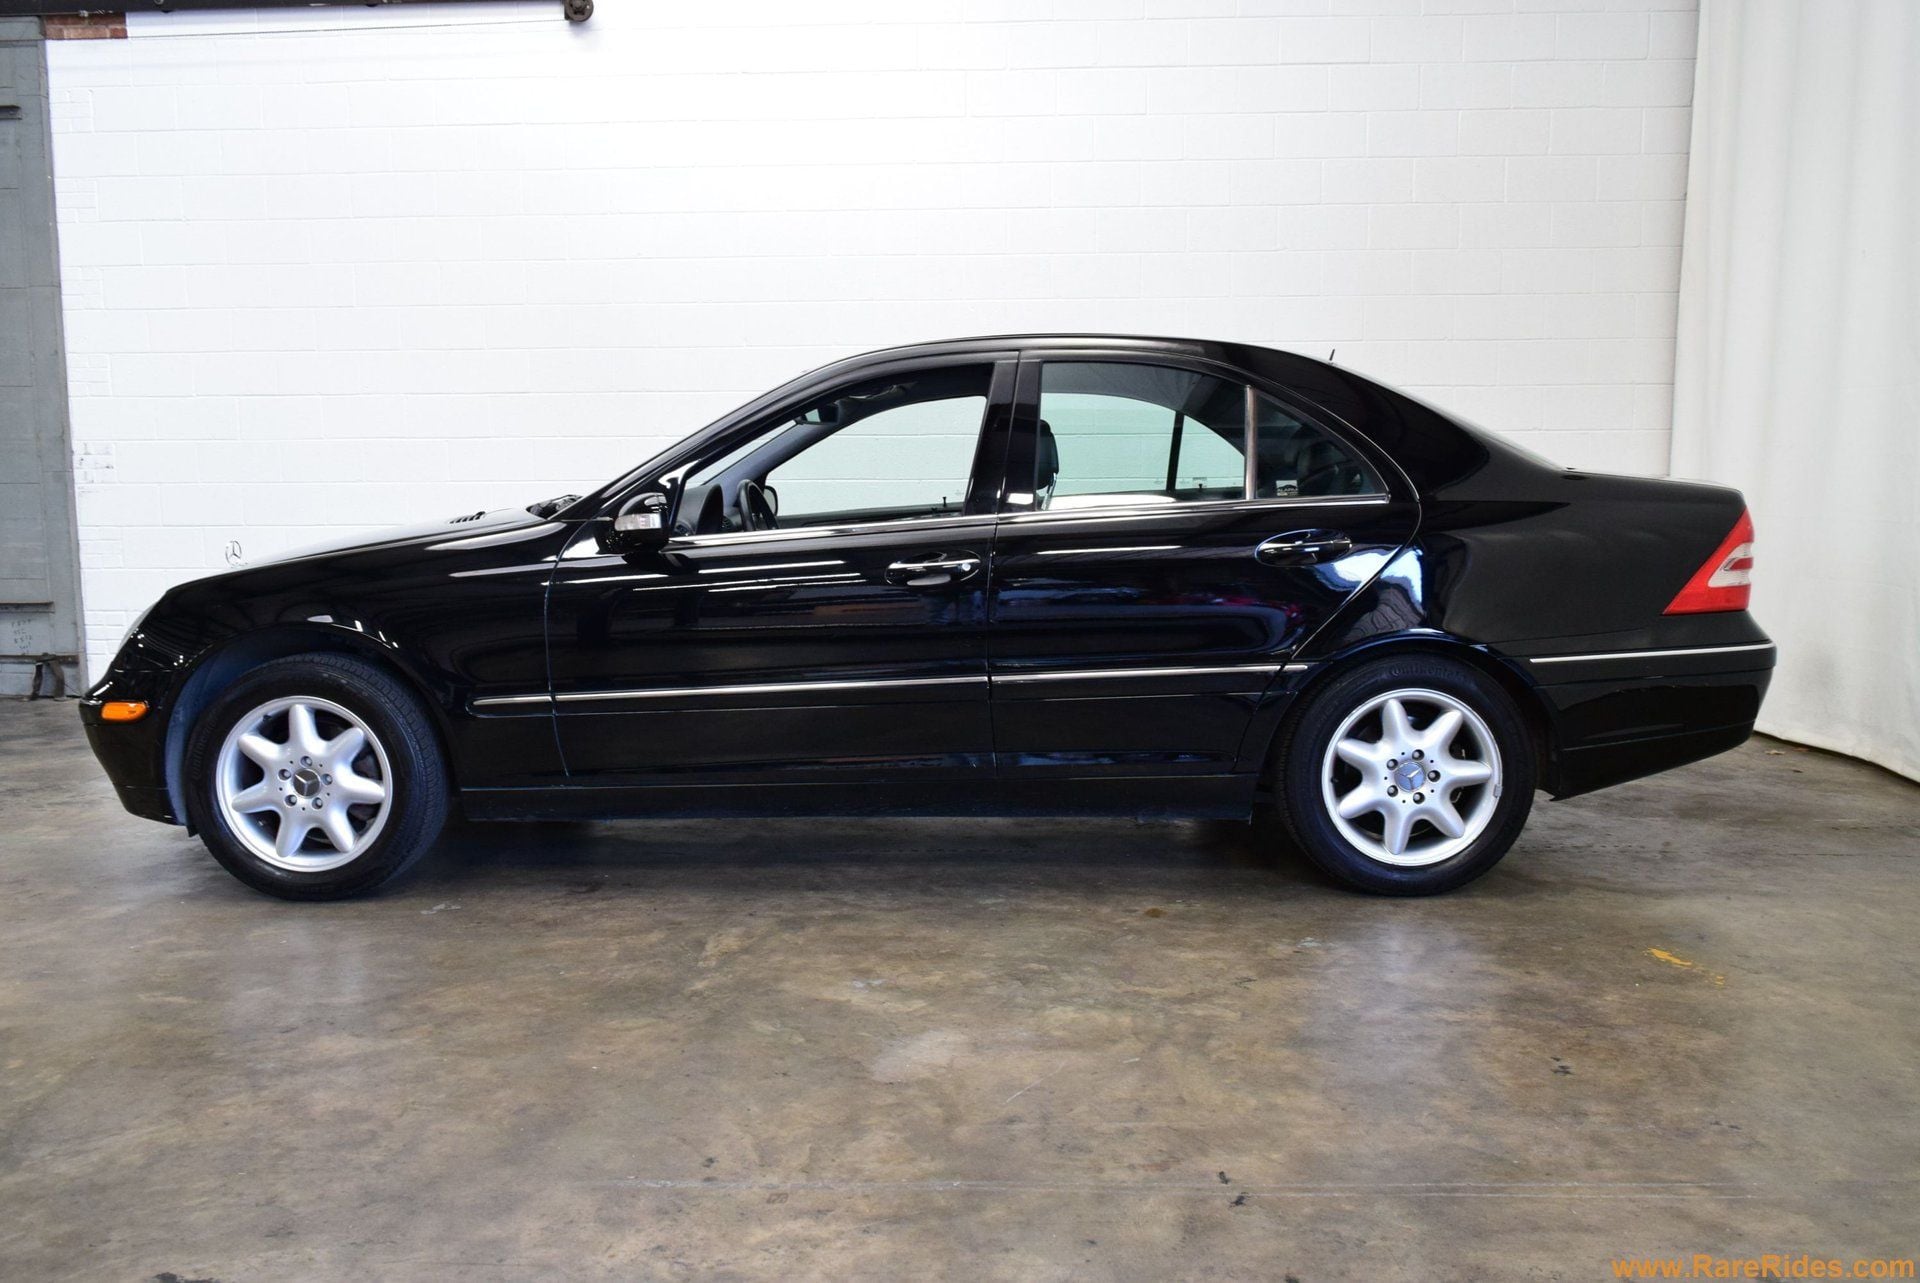 2001 Mercedes-Benz C240 - Unique One-Owner 2001 C240 with 6 Speed Manual Transmission - Used - VIN WDBRF61J71F08762 - 180,000 Miles - 6 cyl - 2WD - Manual - Sedan - Black - Rock Hill, SC 29732, United States